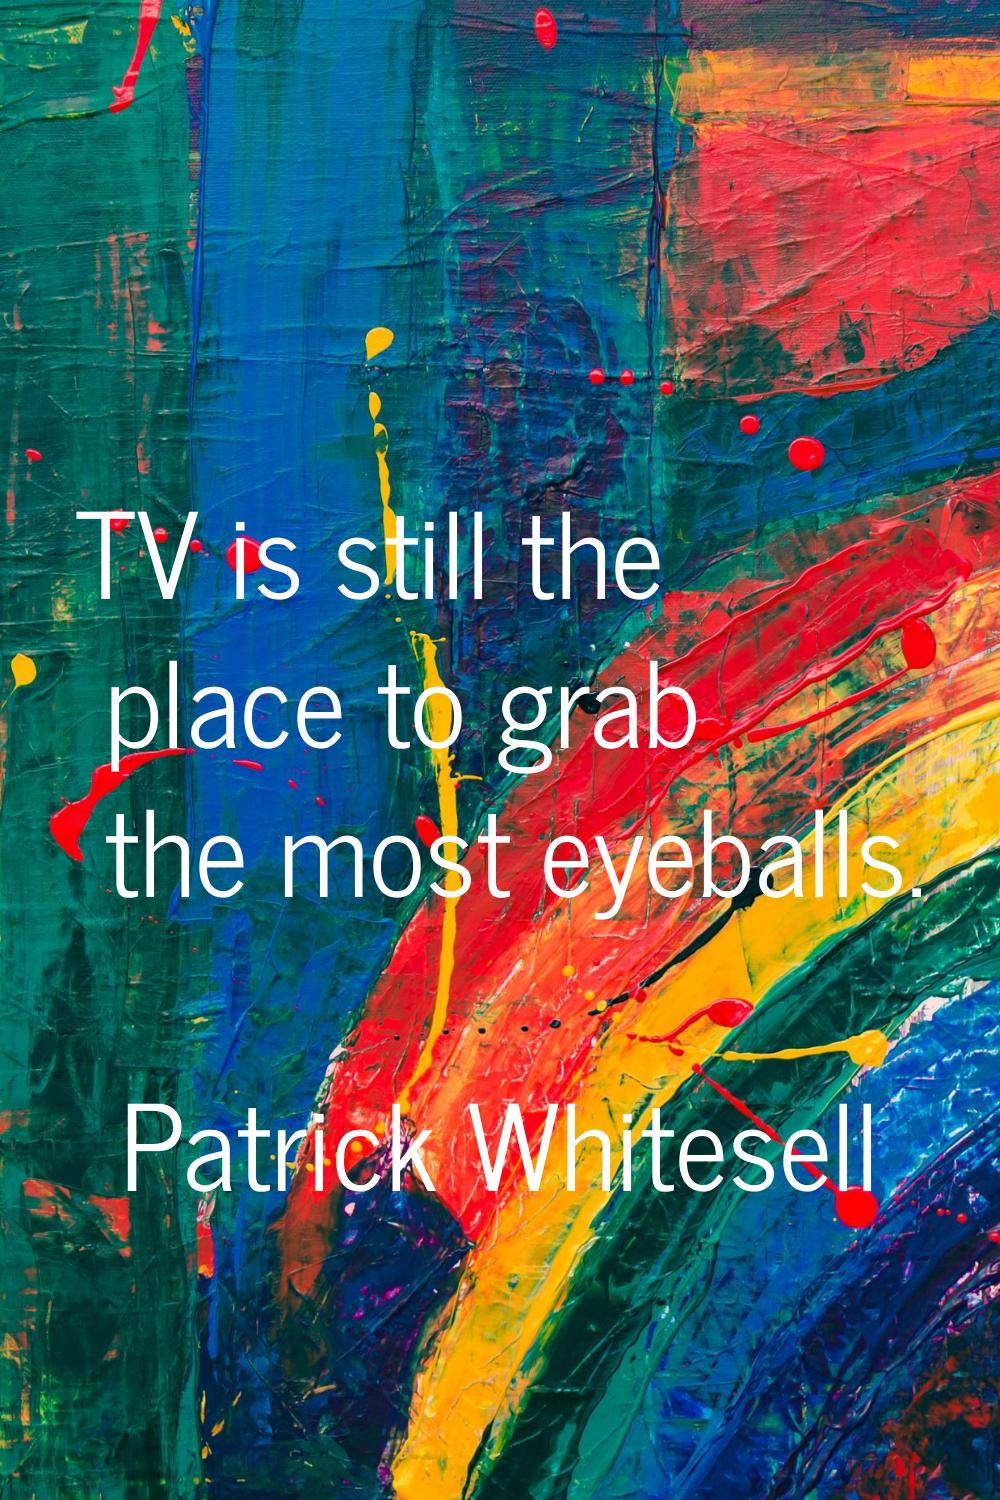 TV is still the place to grab the most eyeballs.